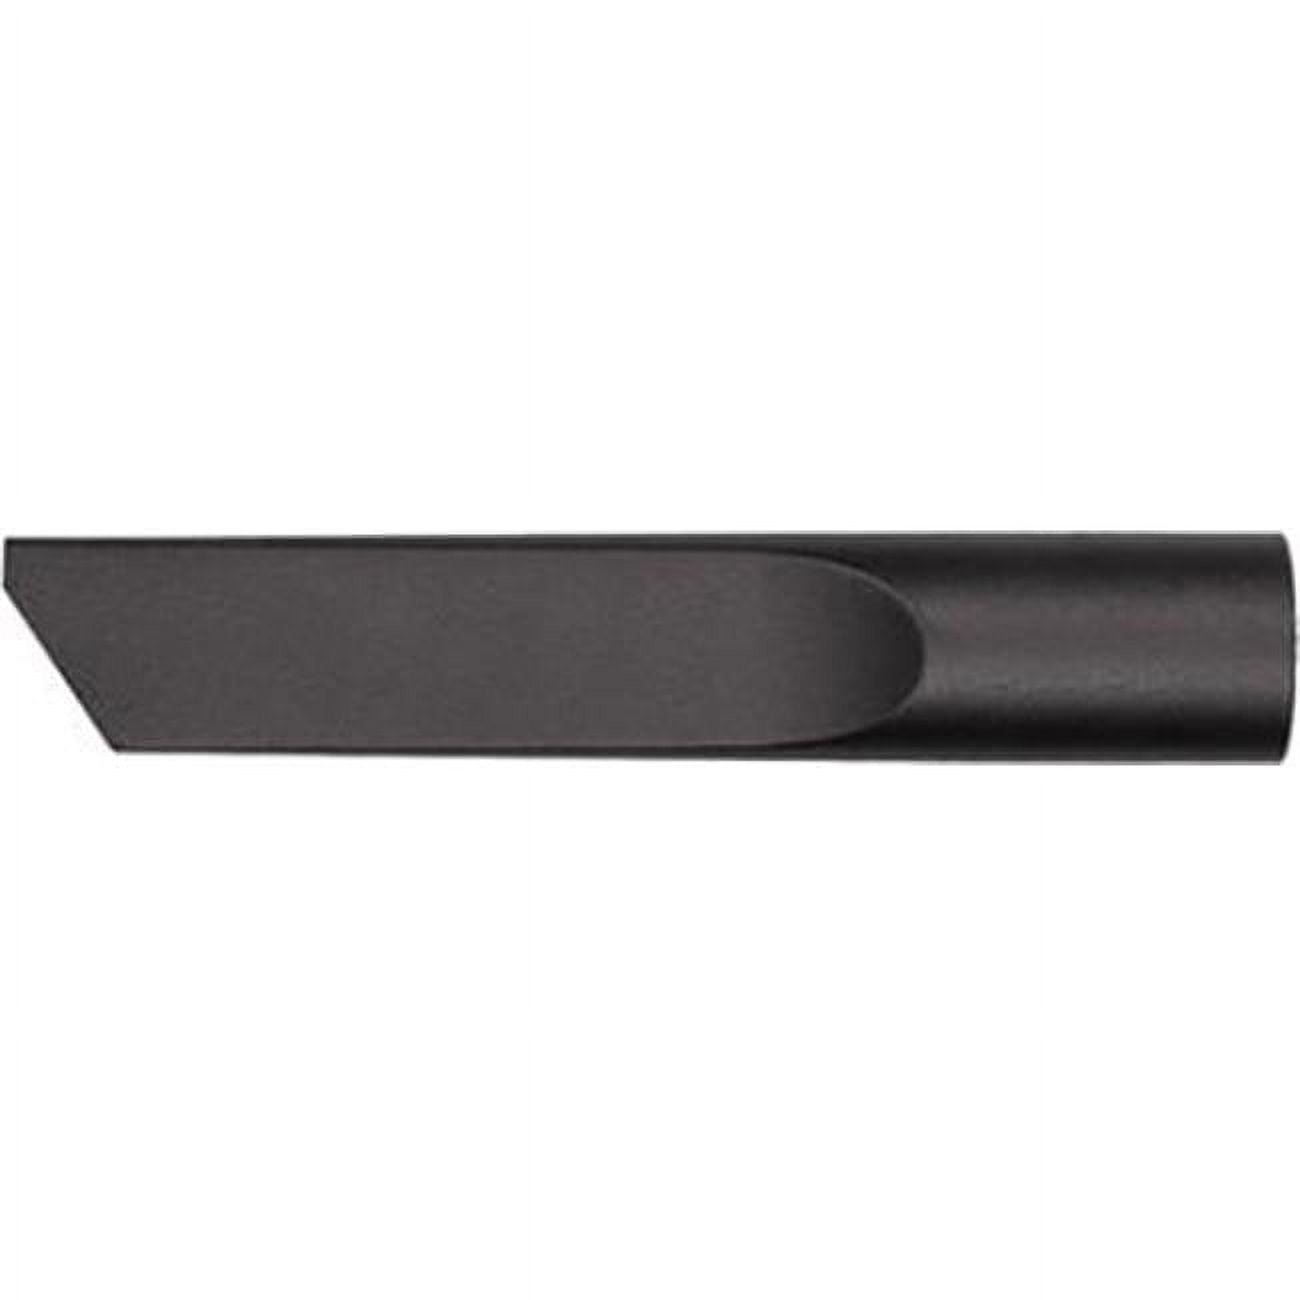 11 Inch Anodized Aluminum Crevice Tool - Cen-Tec Systems